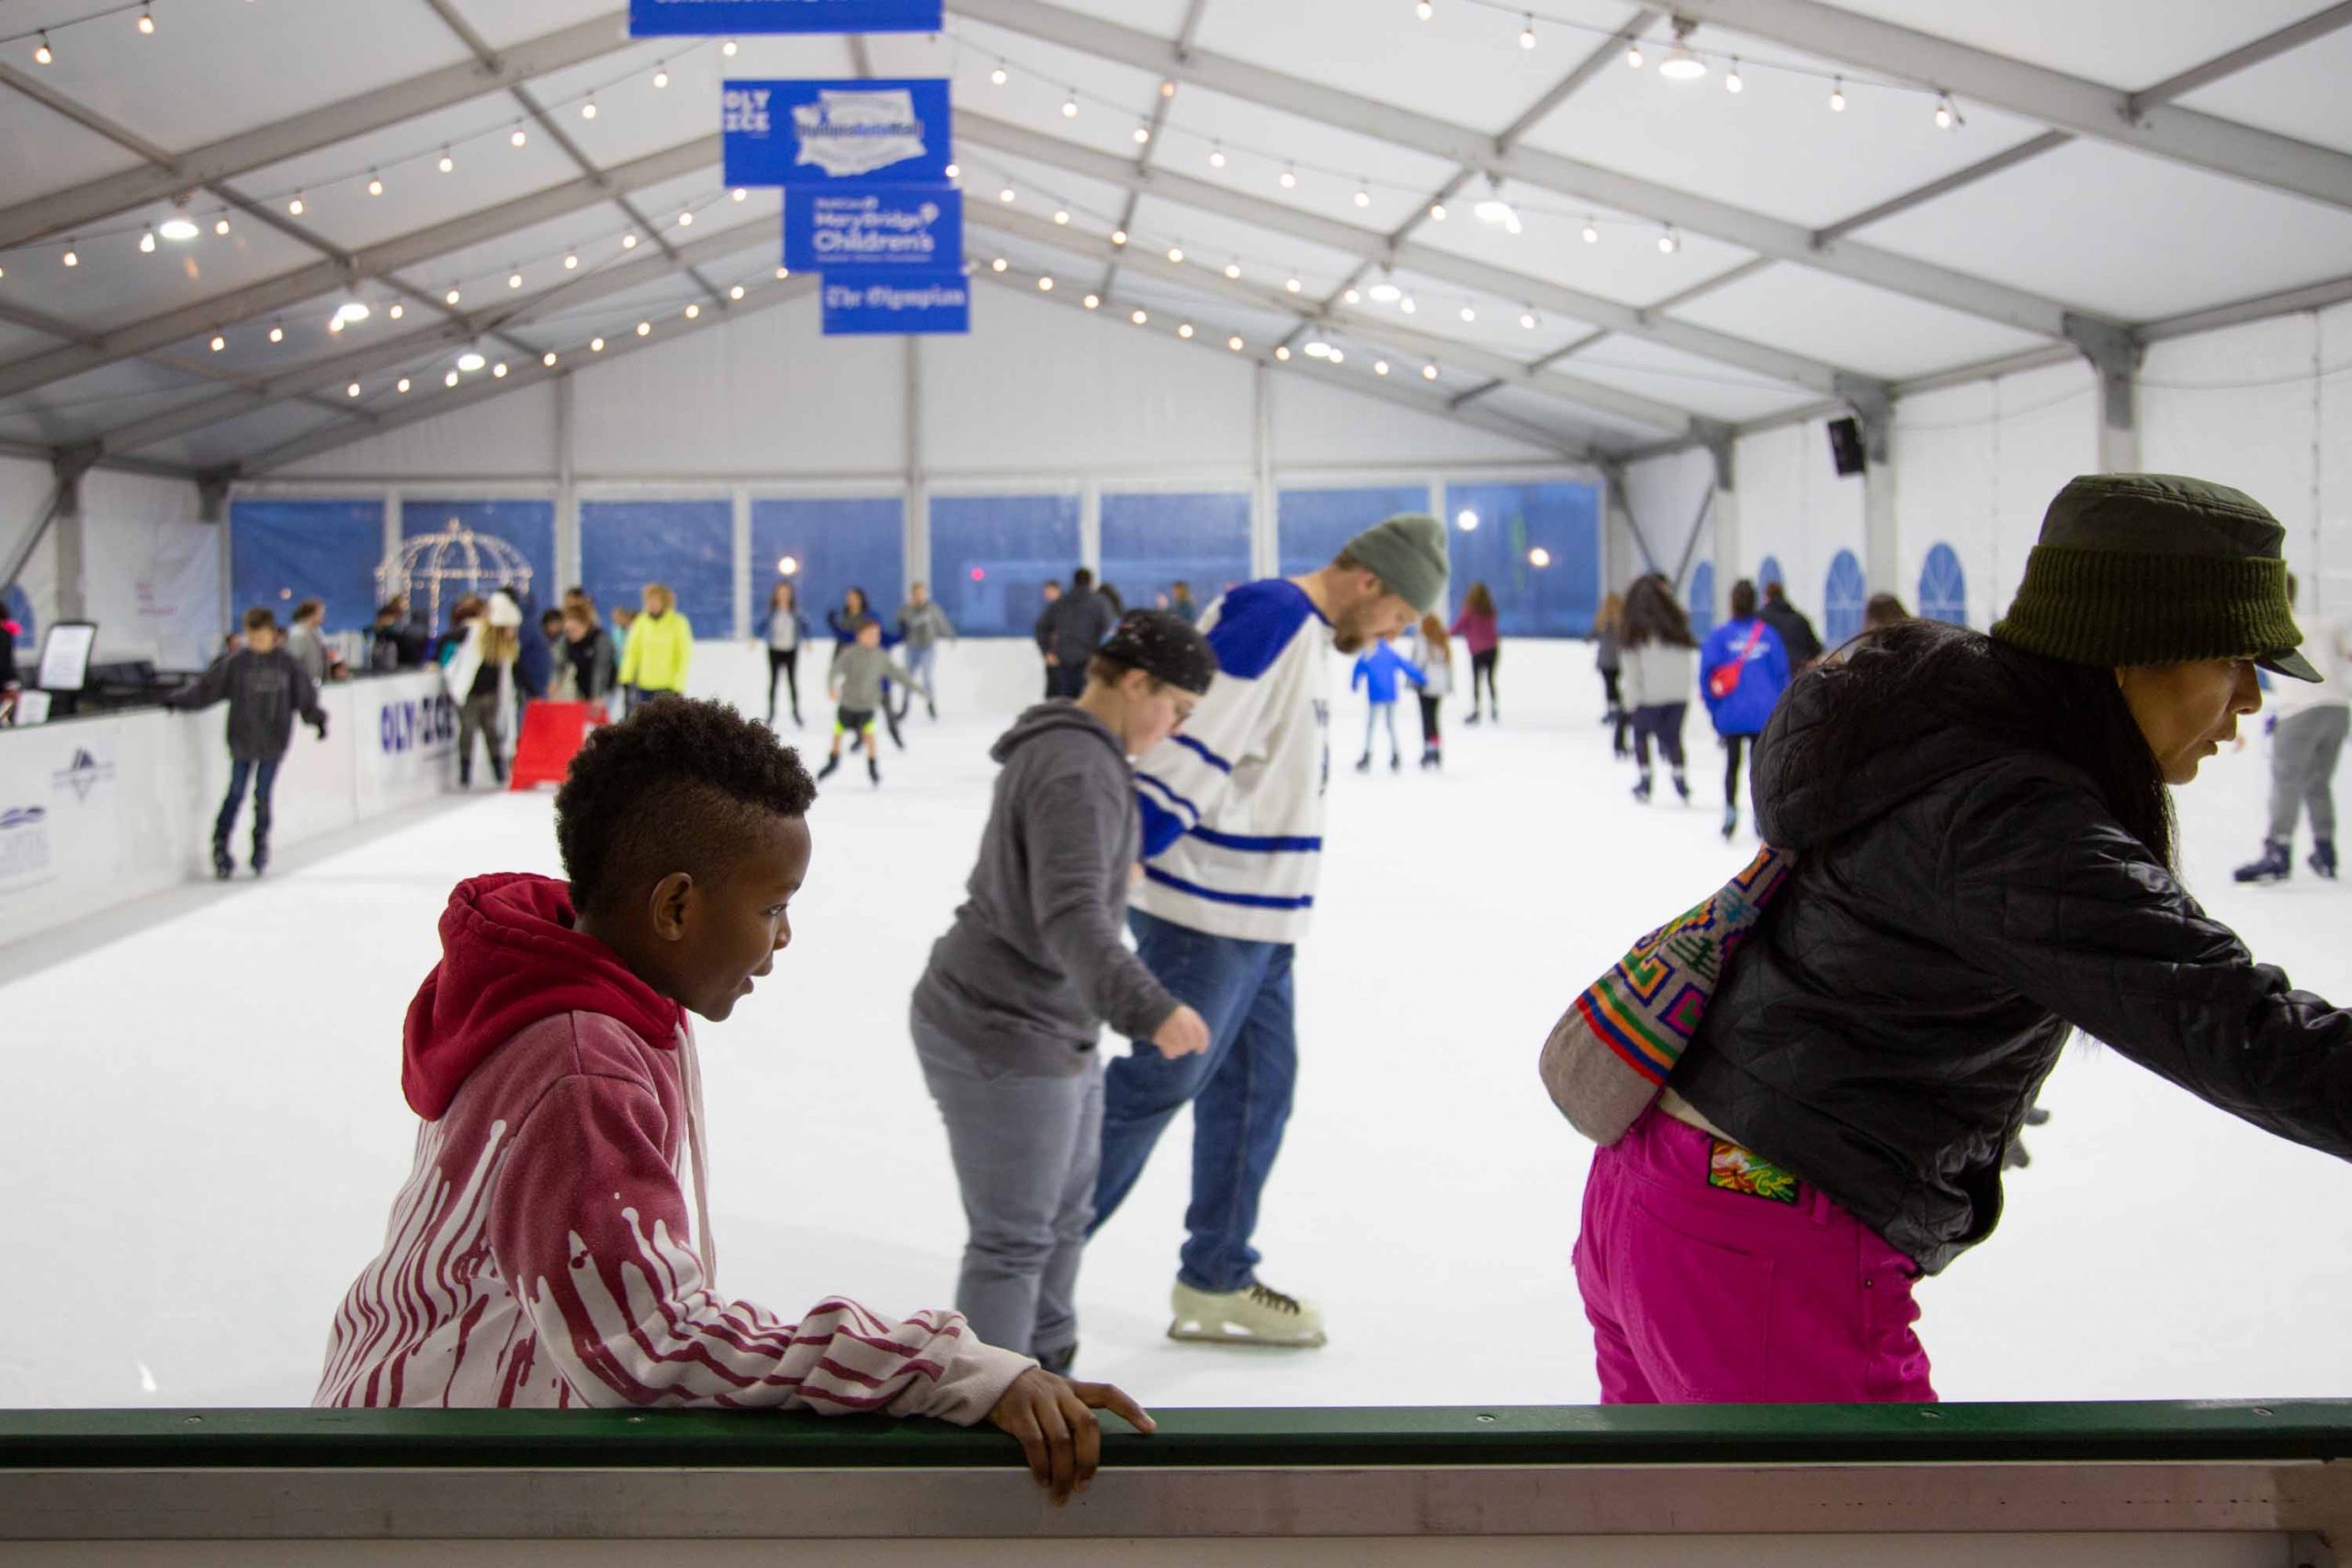 Olympias Ice-Skating Rink, Oly on Ice, Welcomes Their Fourth Season With a Full Schedule of Community Events and Live Performances